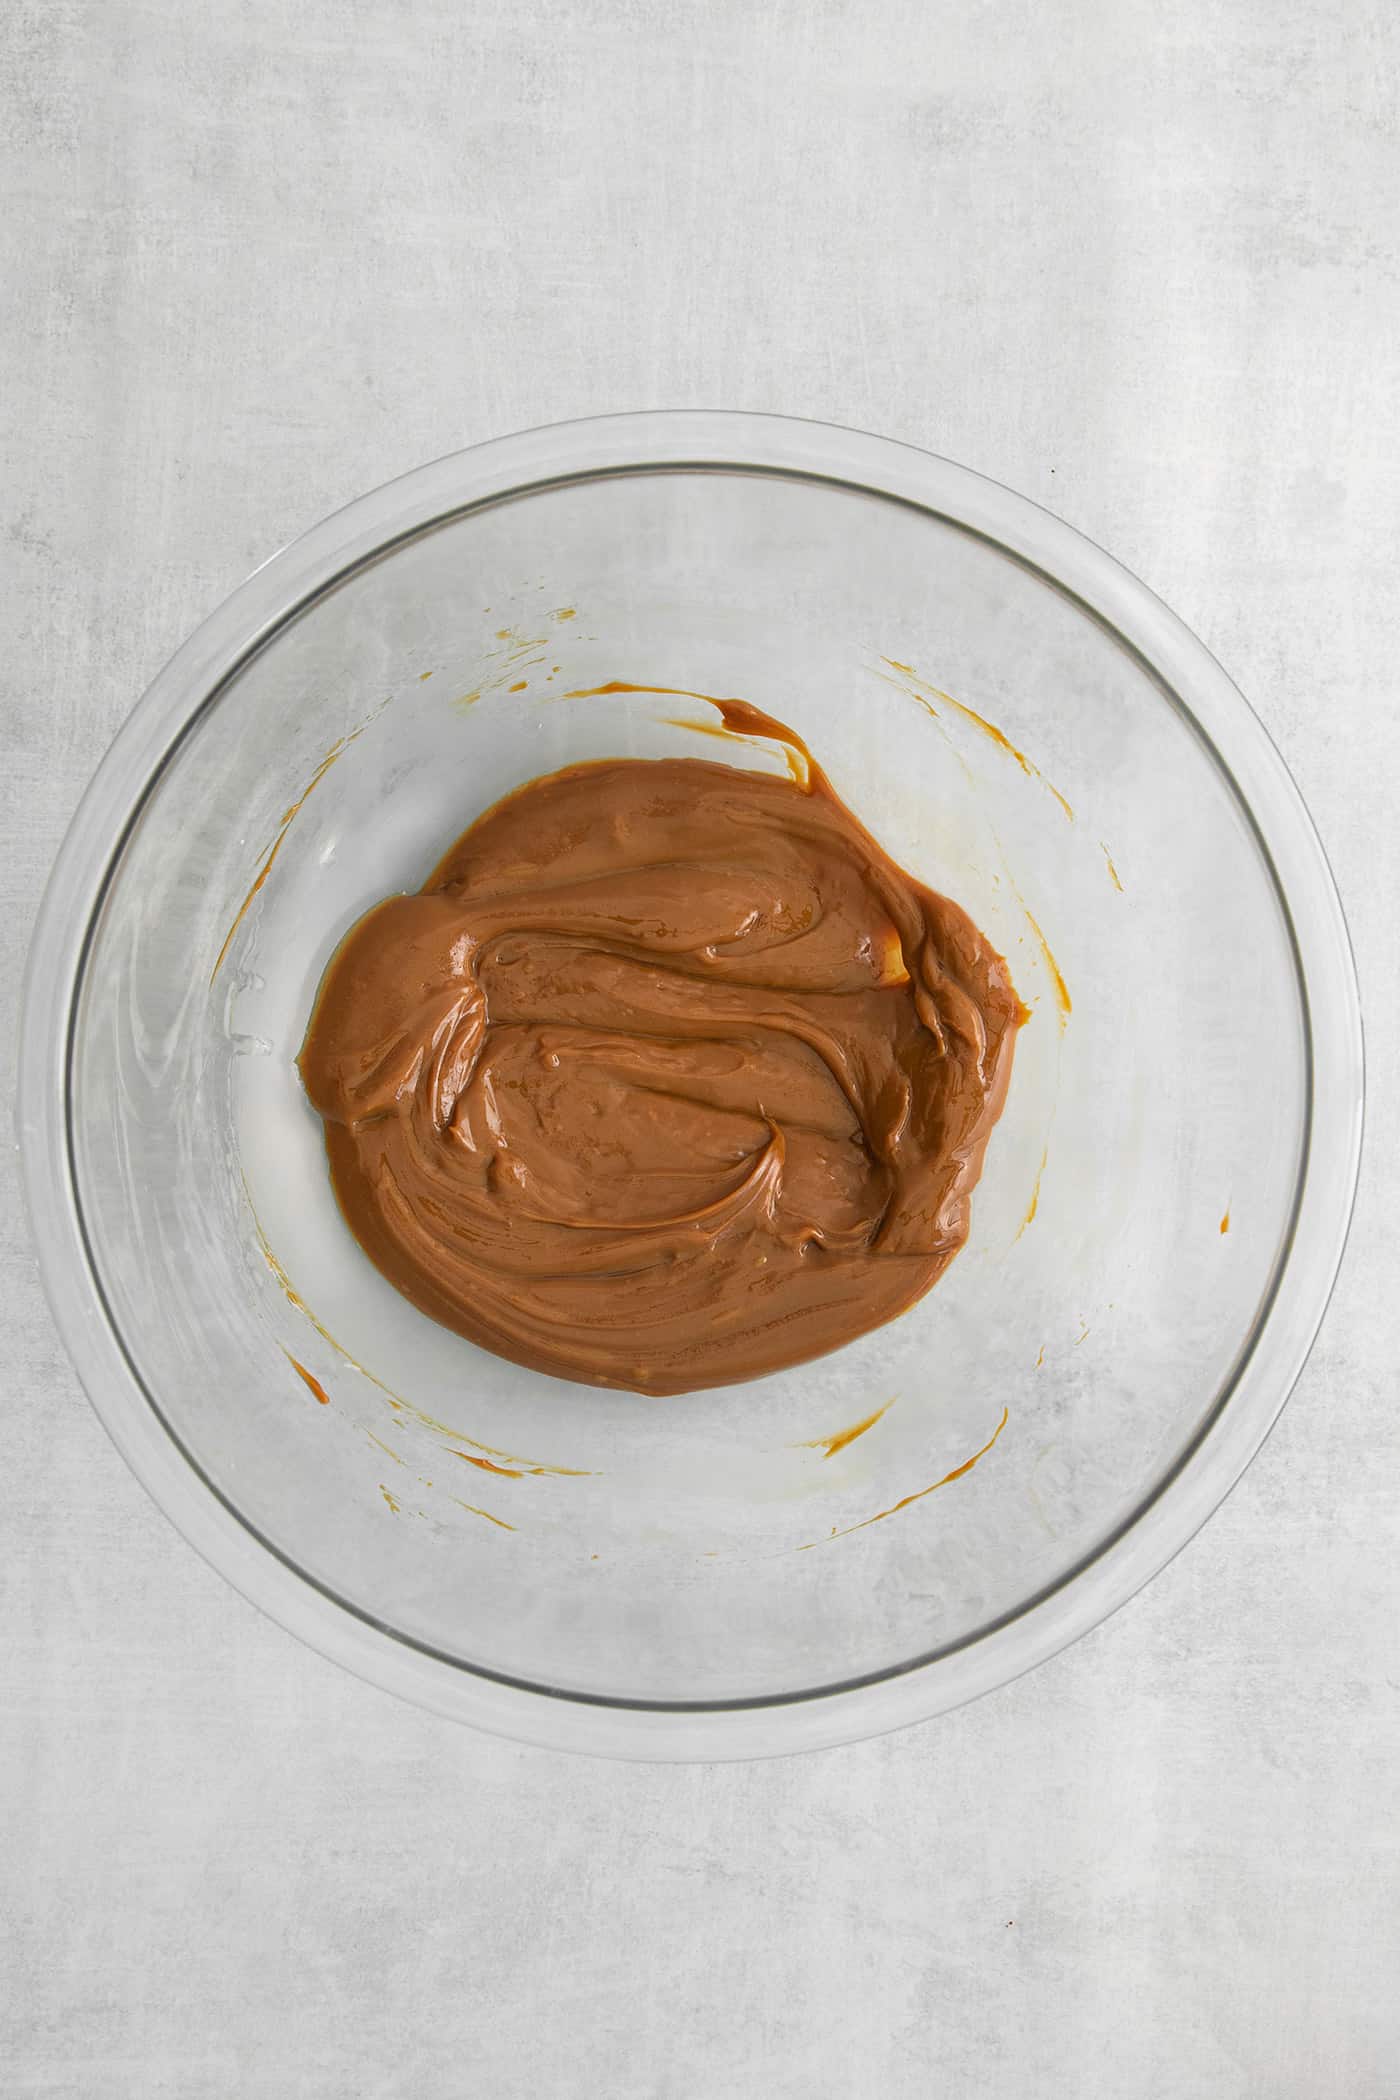 Melted dulce de leche in a bowl